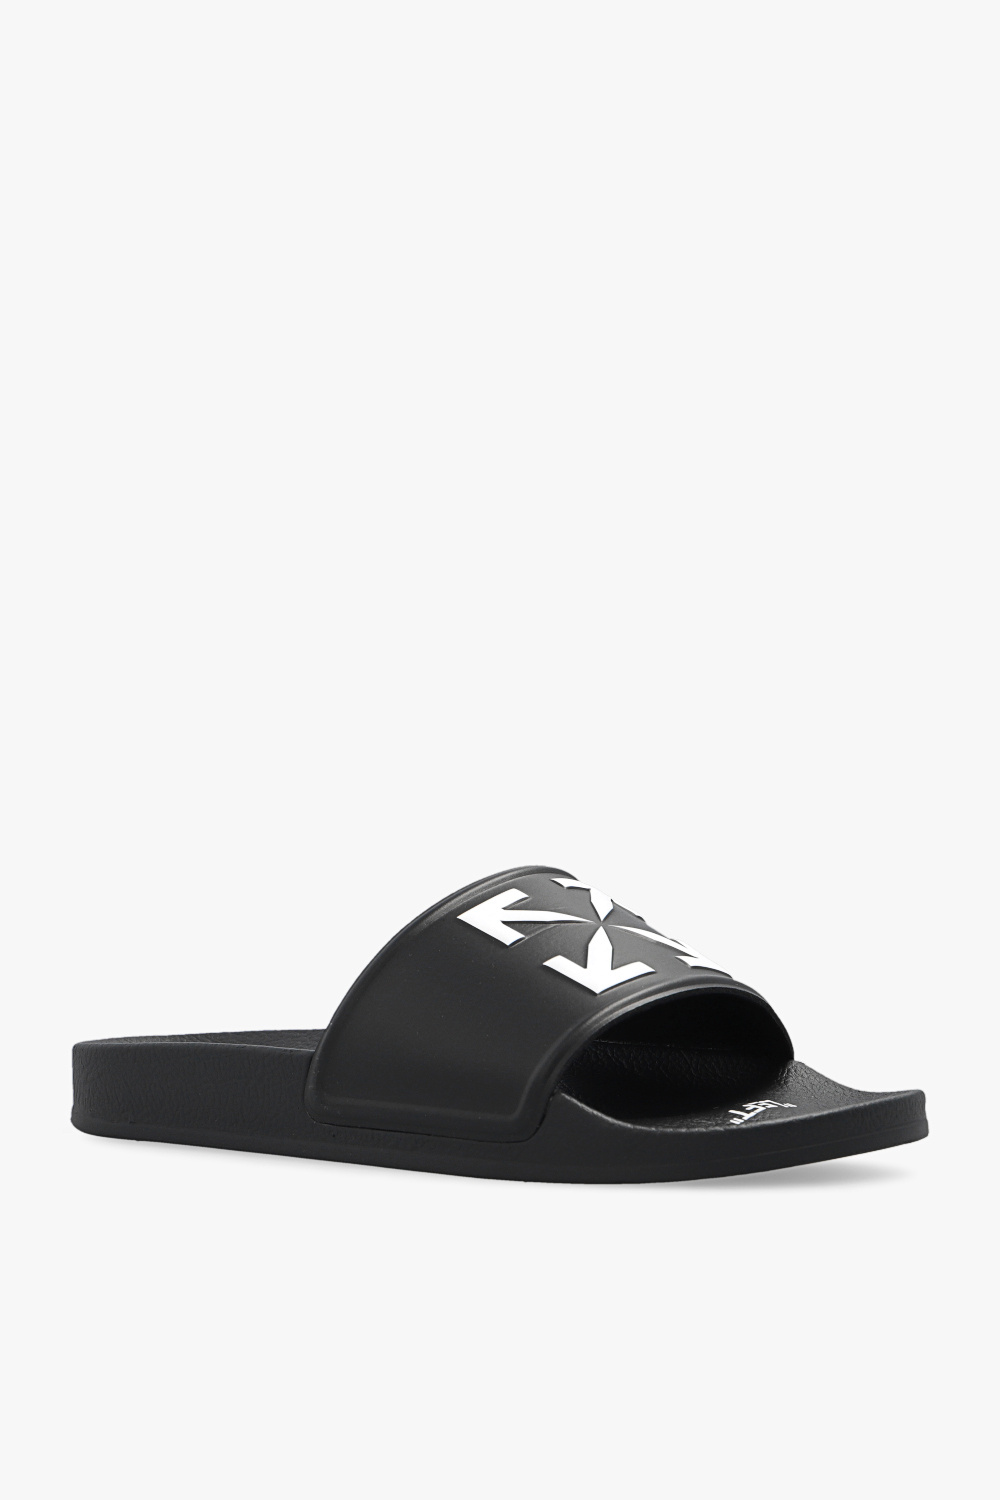 Off-White Slides with arrow motif